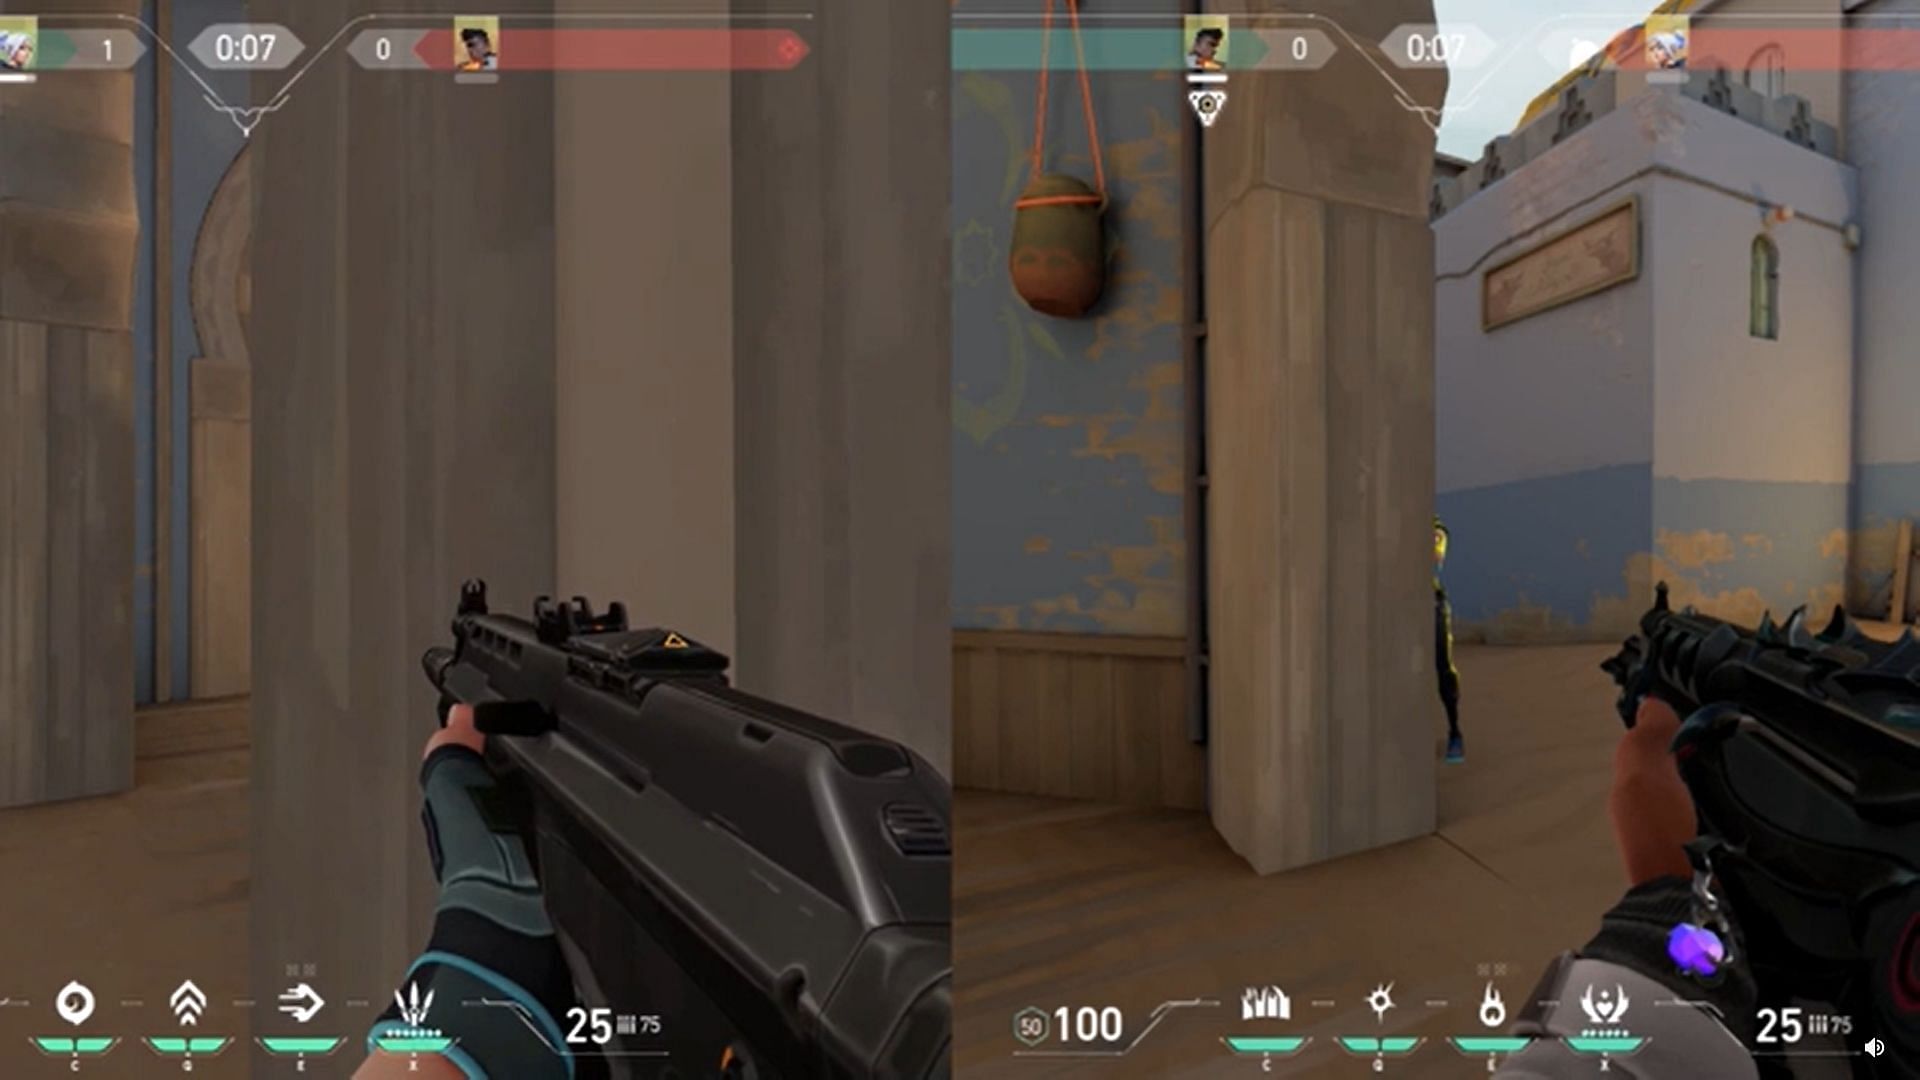 Perspective advantage in effect for the enemy (Screengrab via Reddit thread r/VALORANT)